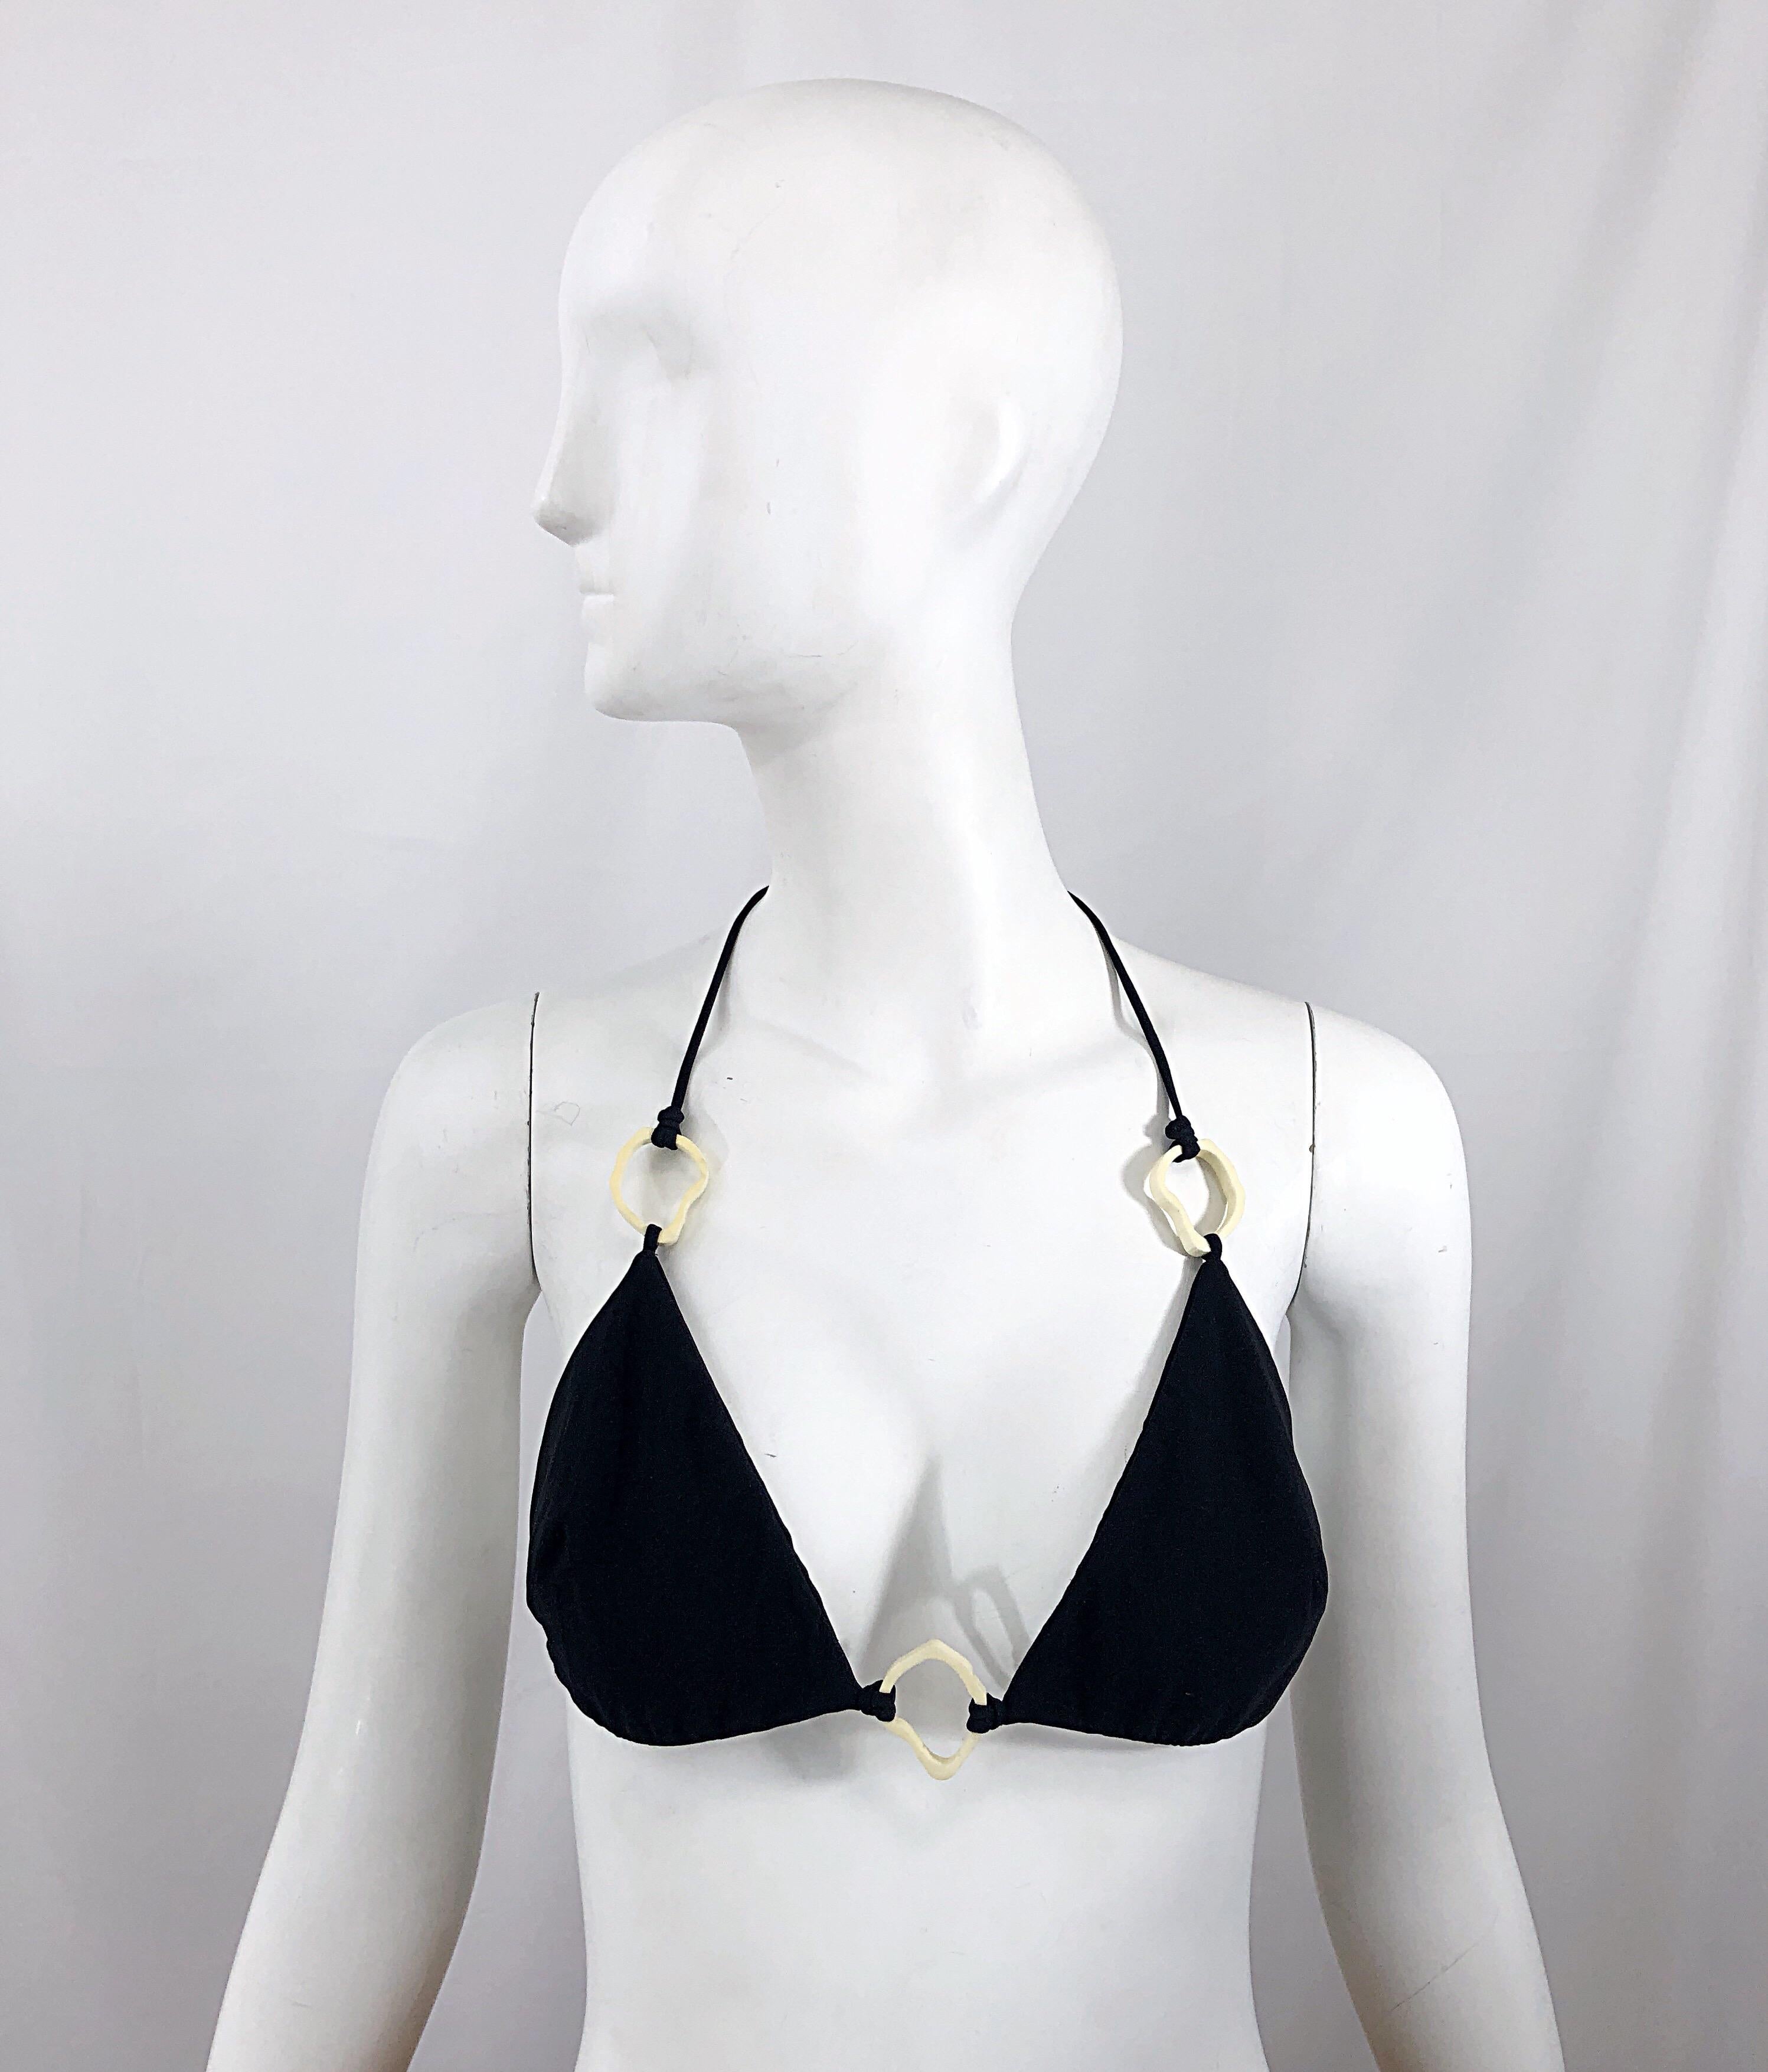 Brand new with tags YVES SAINT LAURENT by TOM FORD black halter sting bikini top! Features ivory plastic details that resemble pieces of coral. In great unworn condition.
Made in Italy
Marked Size Large
Measurements: (lots of stretch)
34-46 inch